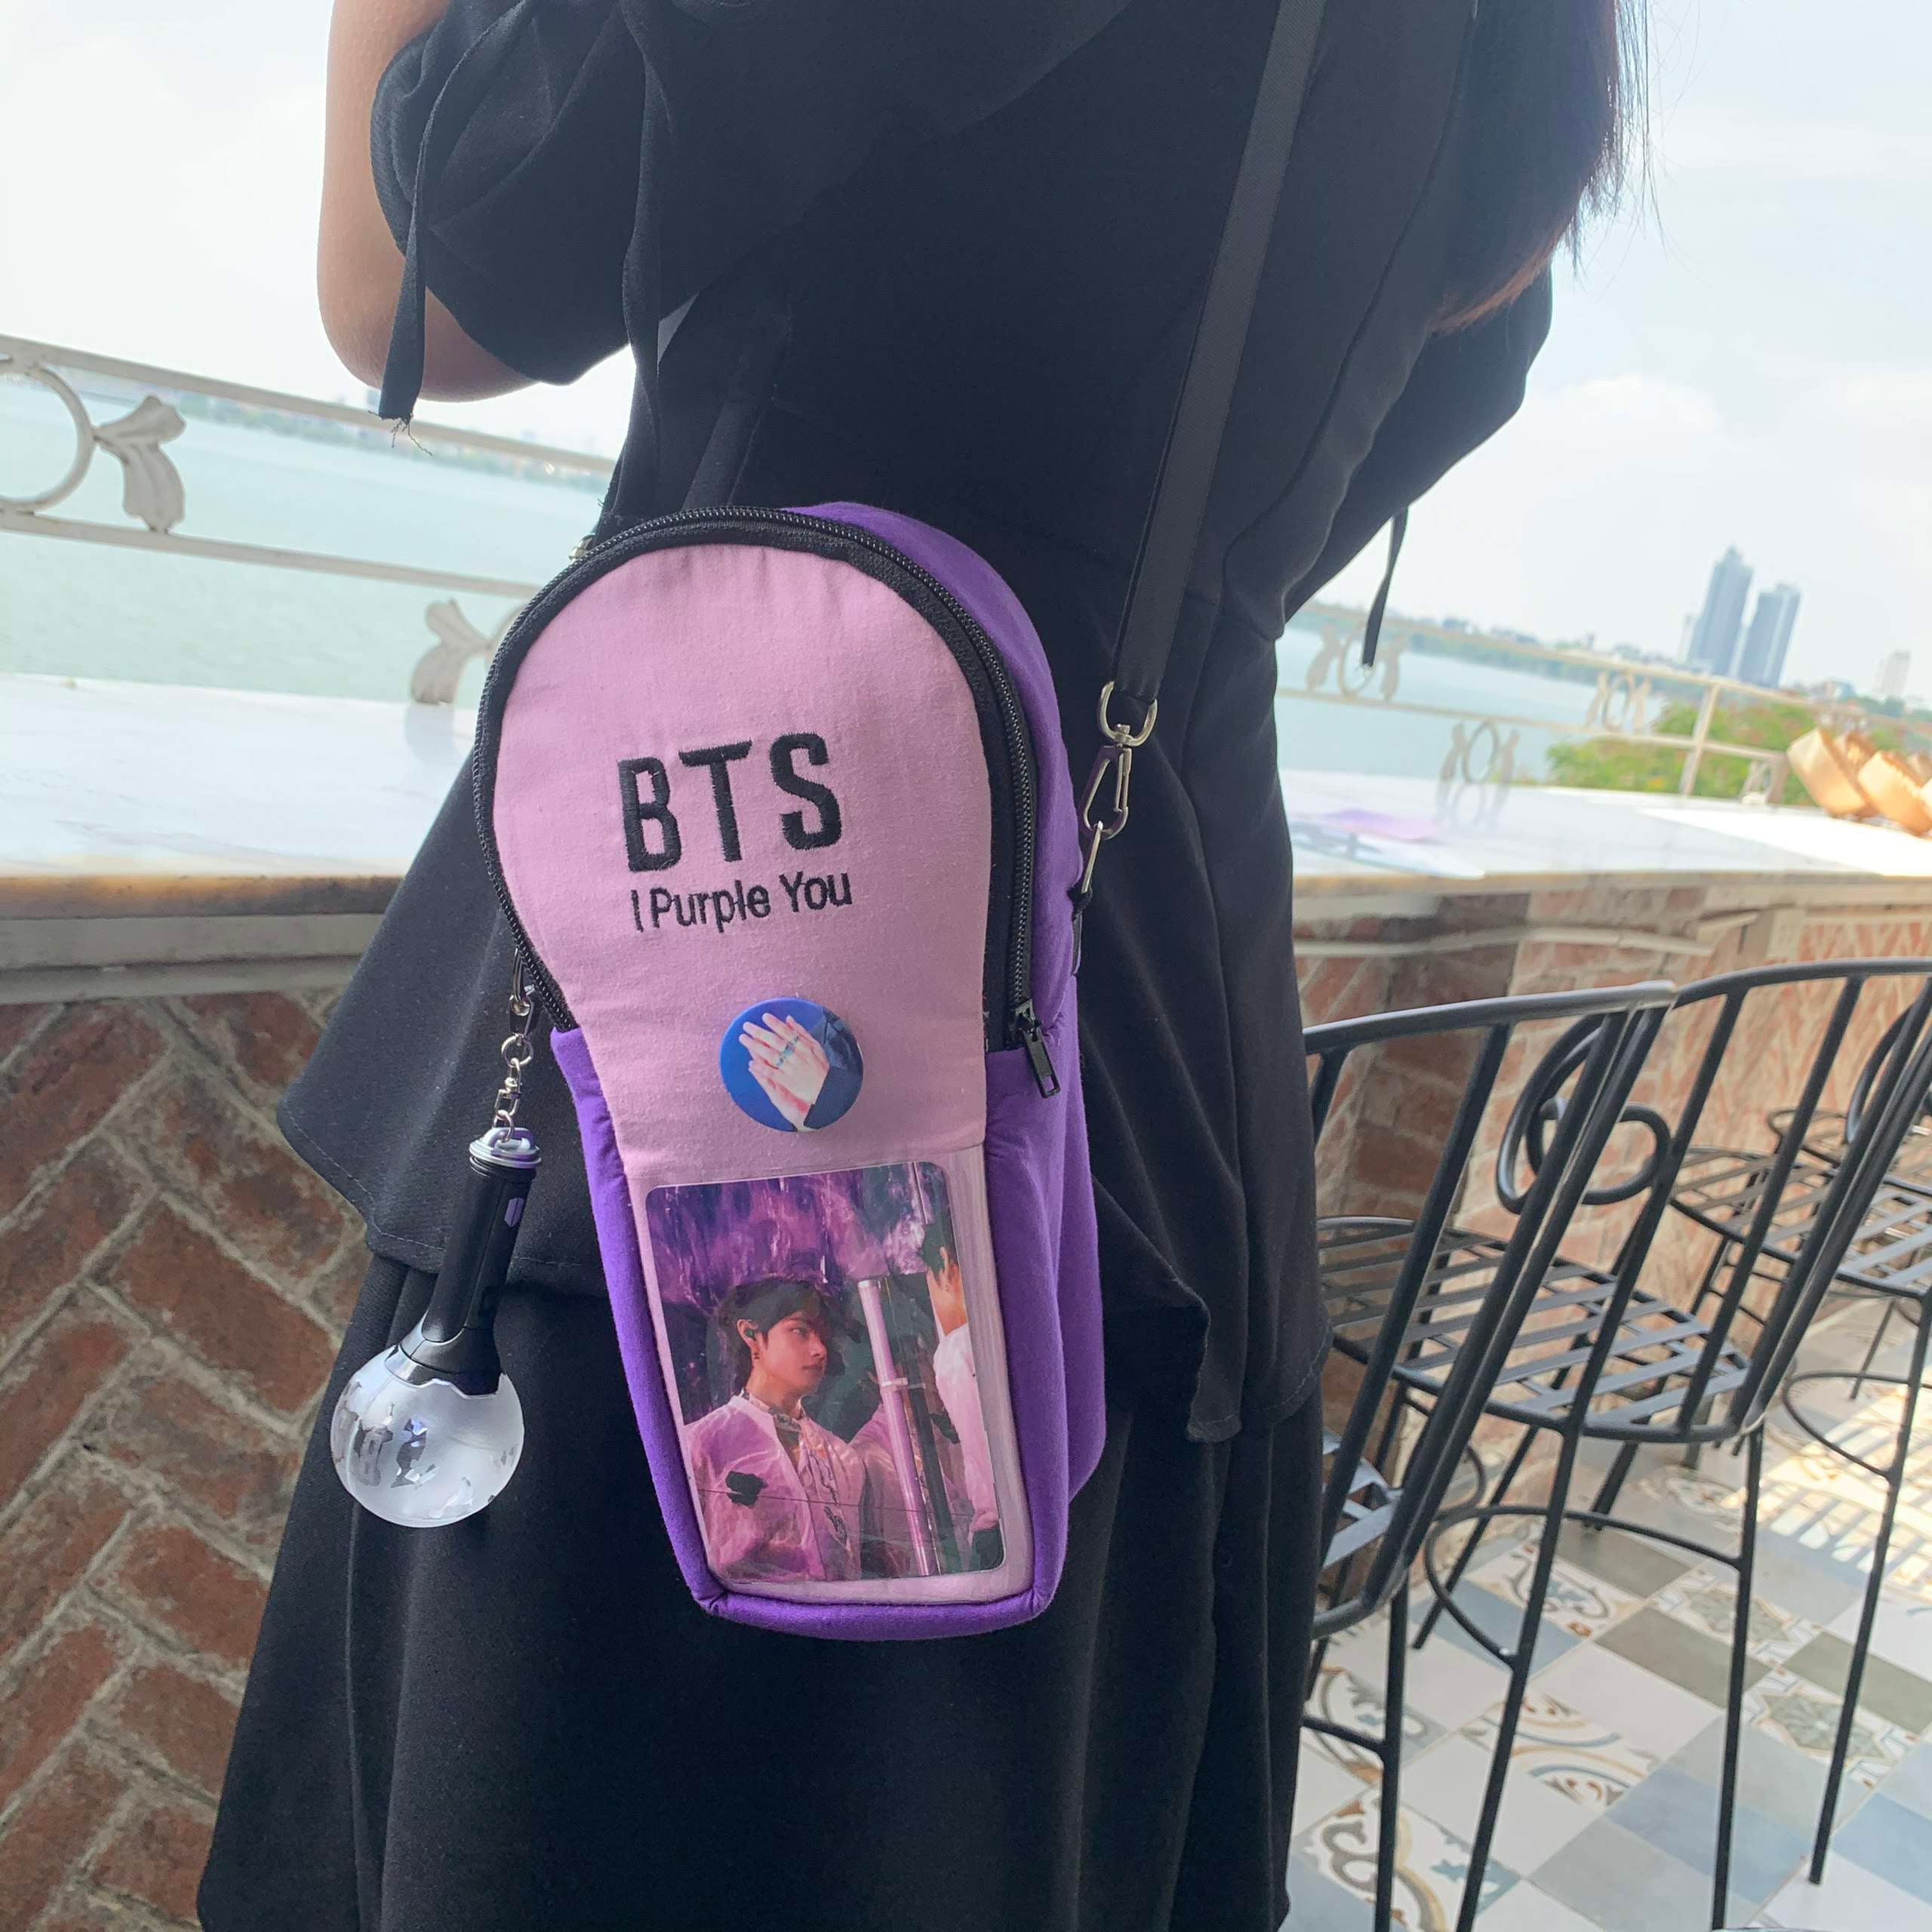 K-Pop Fancy - Come checkout the NEWEST ARRIVAL for BTS ARMY! #BTS #BTSARMY # backpack #kpop | Facebook